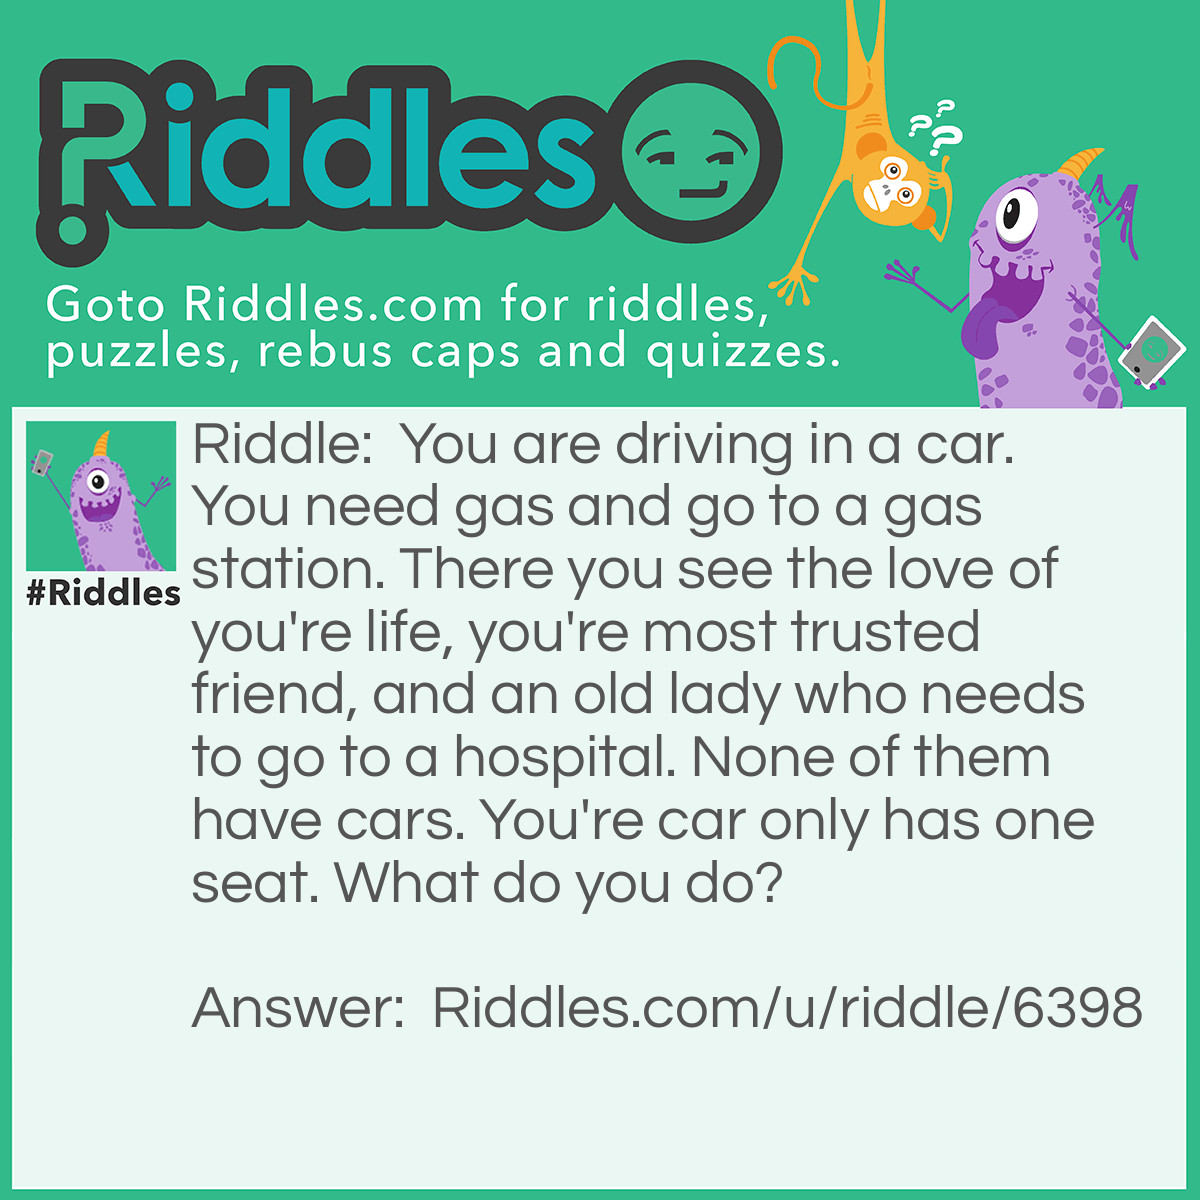 Riddle: You are driving in a car. You need gas and go to a gas station. There you see the love of you're life, you're most trusted friend, and an old lady who needs to go to a hospital. None of them have cars. You're car only has one seat. What do you do? Answer: Give the car to you're most trusted friend and let them take the eldery woman to the hopital, and stay with love of you're life.